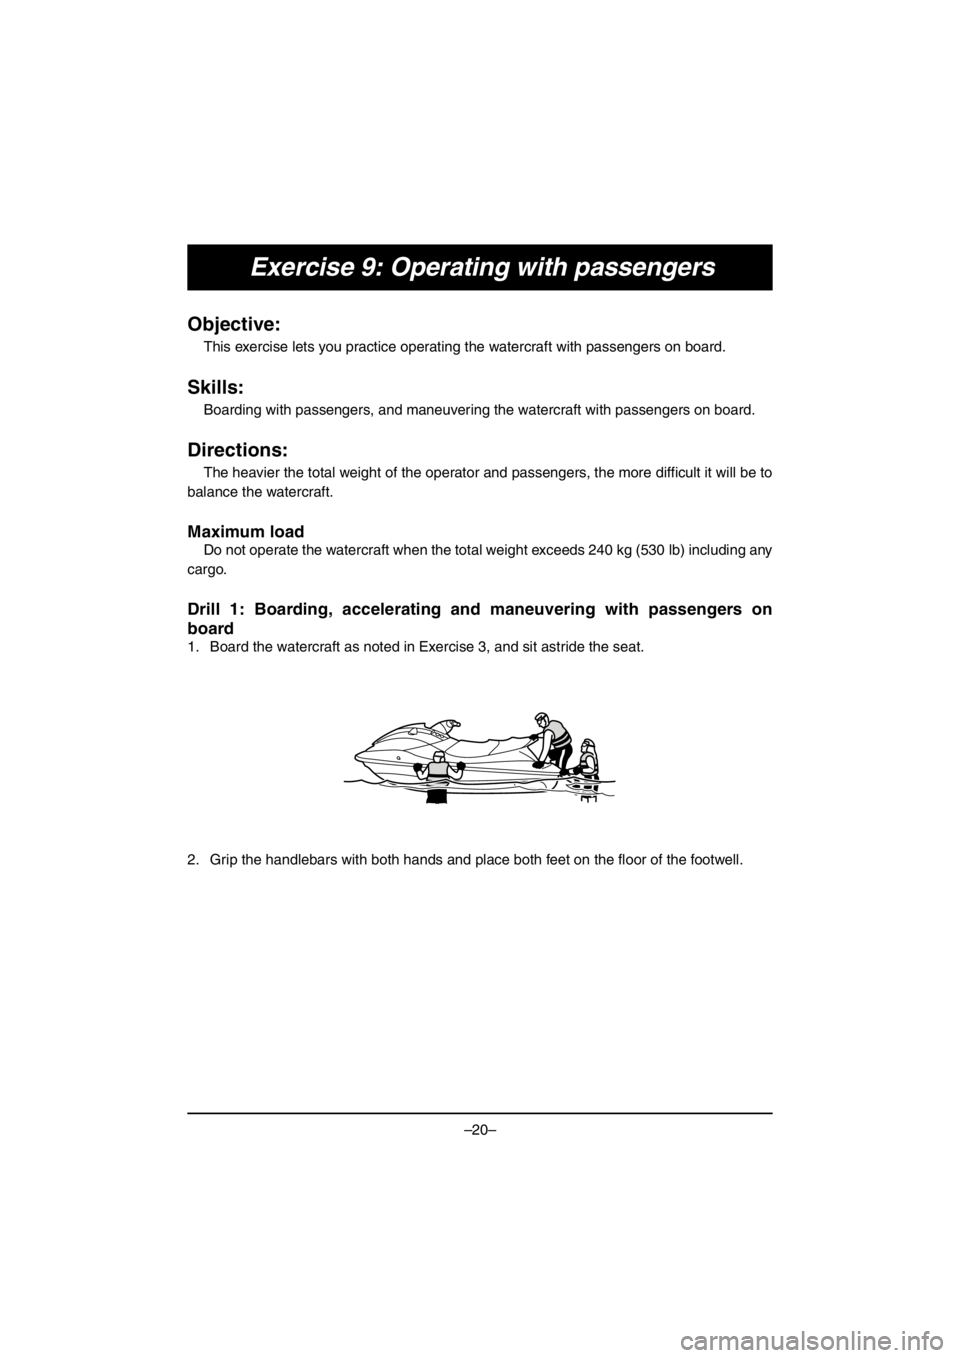 YAMAHA V1 2016  Manuale duso (in Italian) –20–
Exercise 9: Operating with passengers
Objective:
This exercise lets you practice operating the watercraft with passengers on board.
Skills:
Boarding with passengers, and maneuvering the water